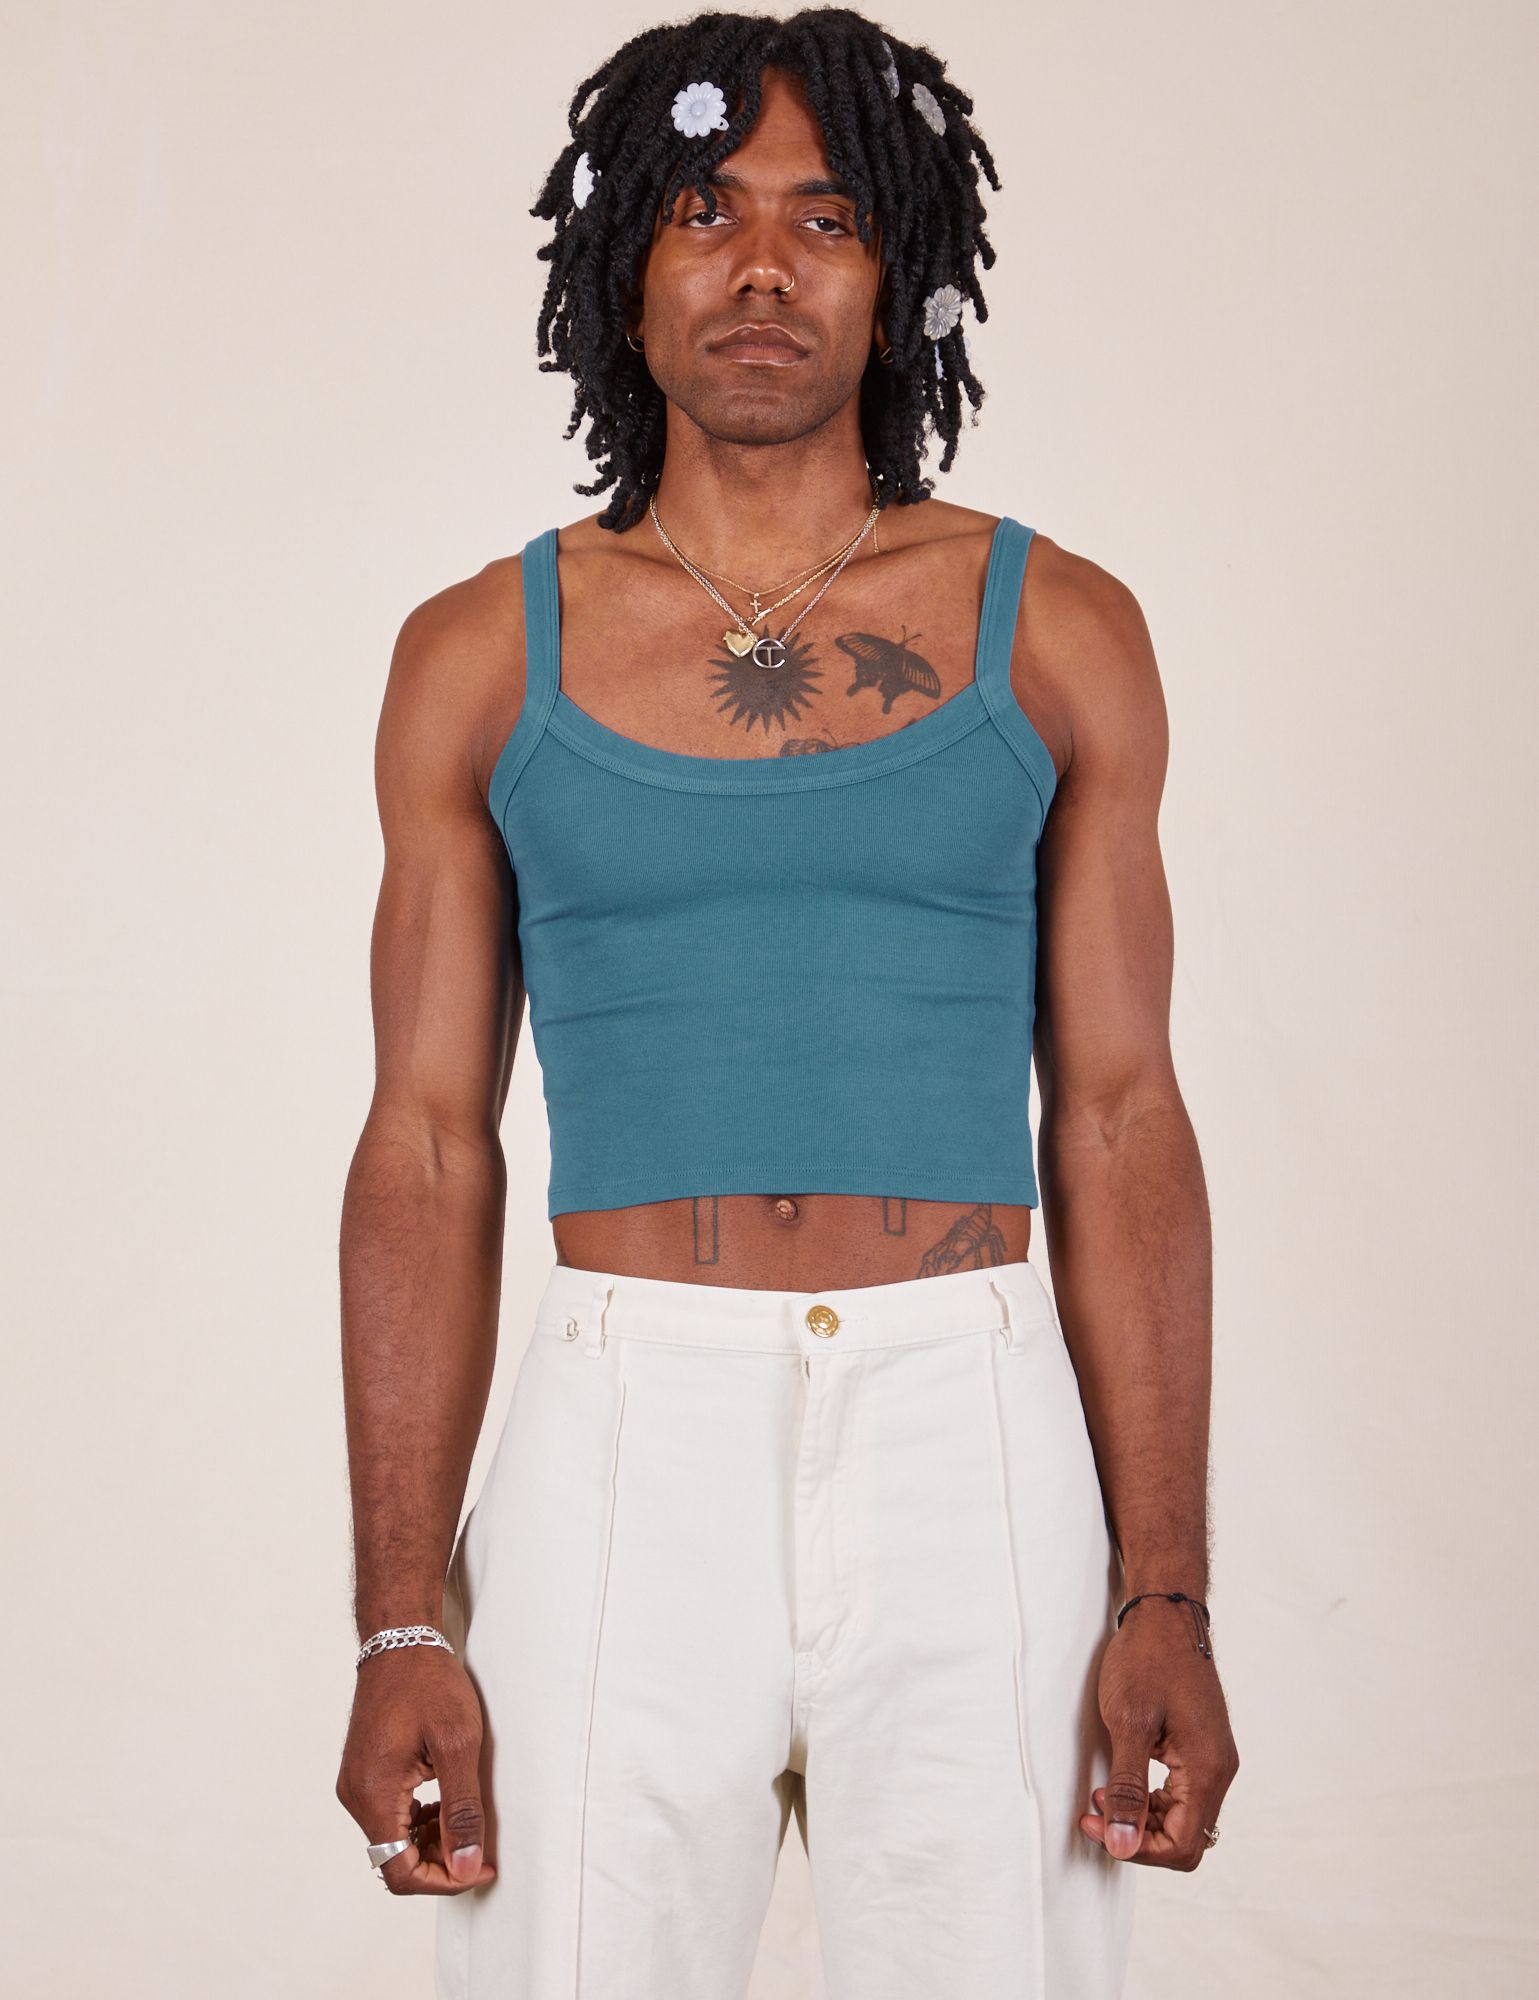 Jerrod is 6&#39;3&quot; and wearing S Cropped Cami in Marine Blue paired with vintage off-white Western Pants